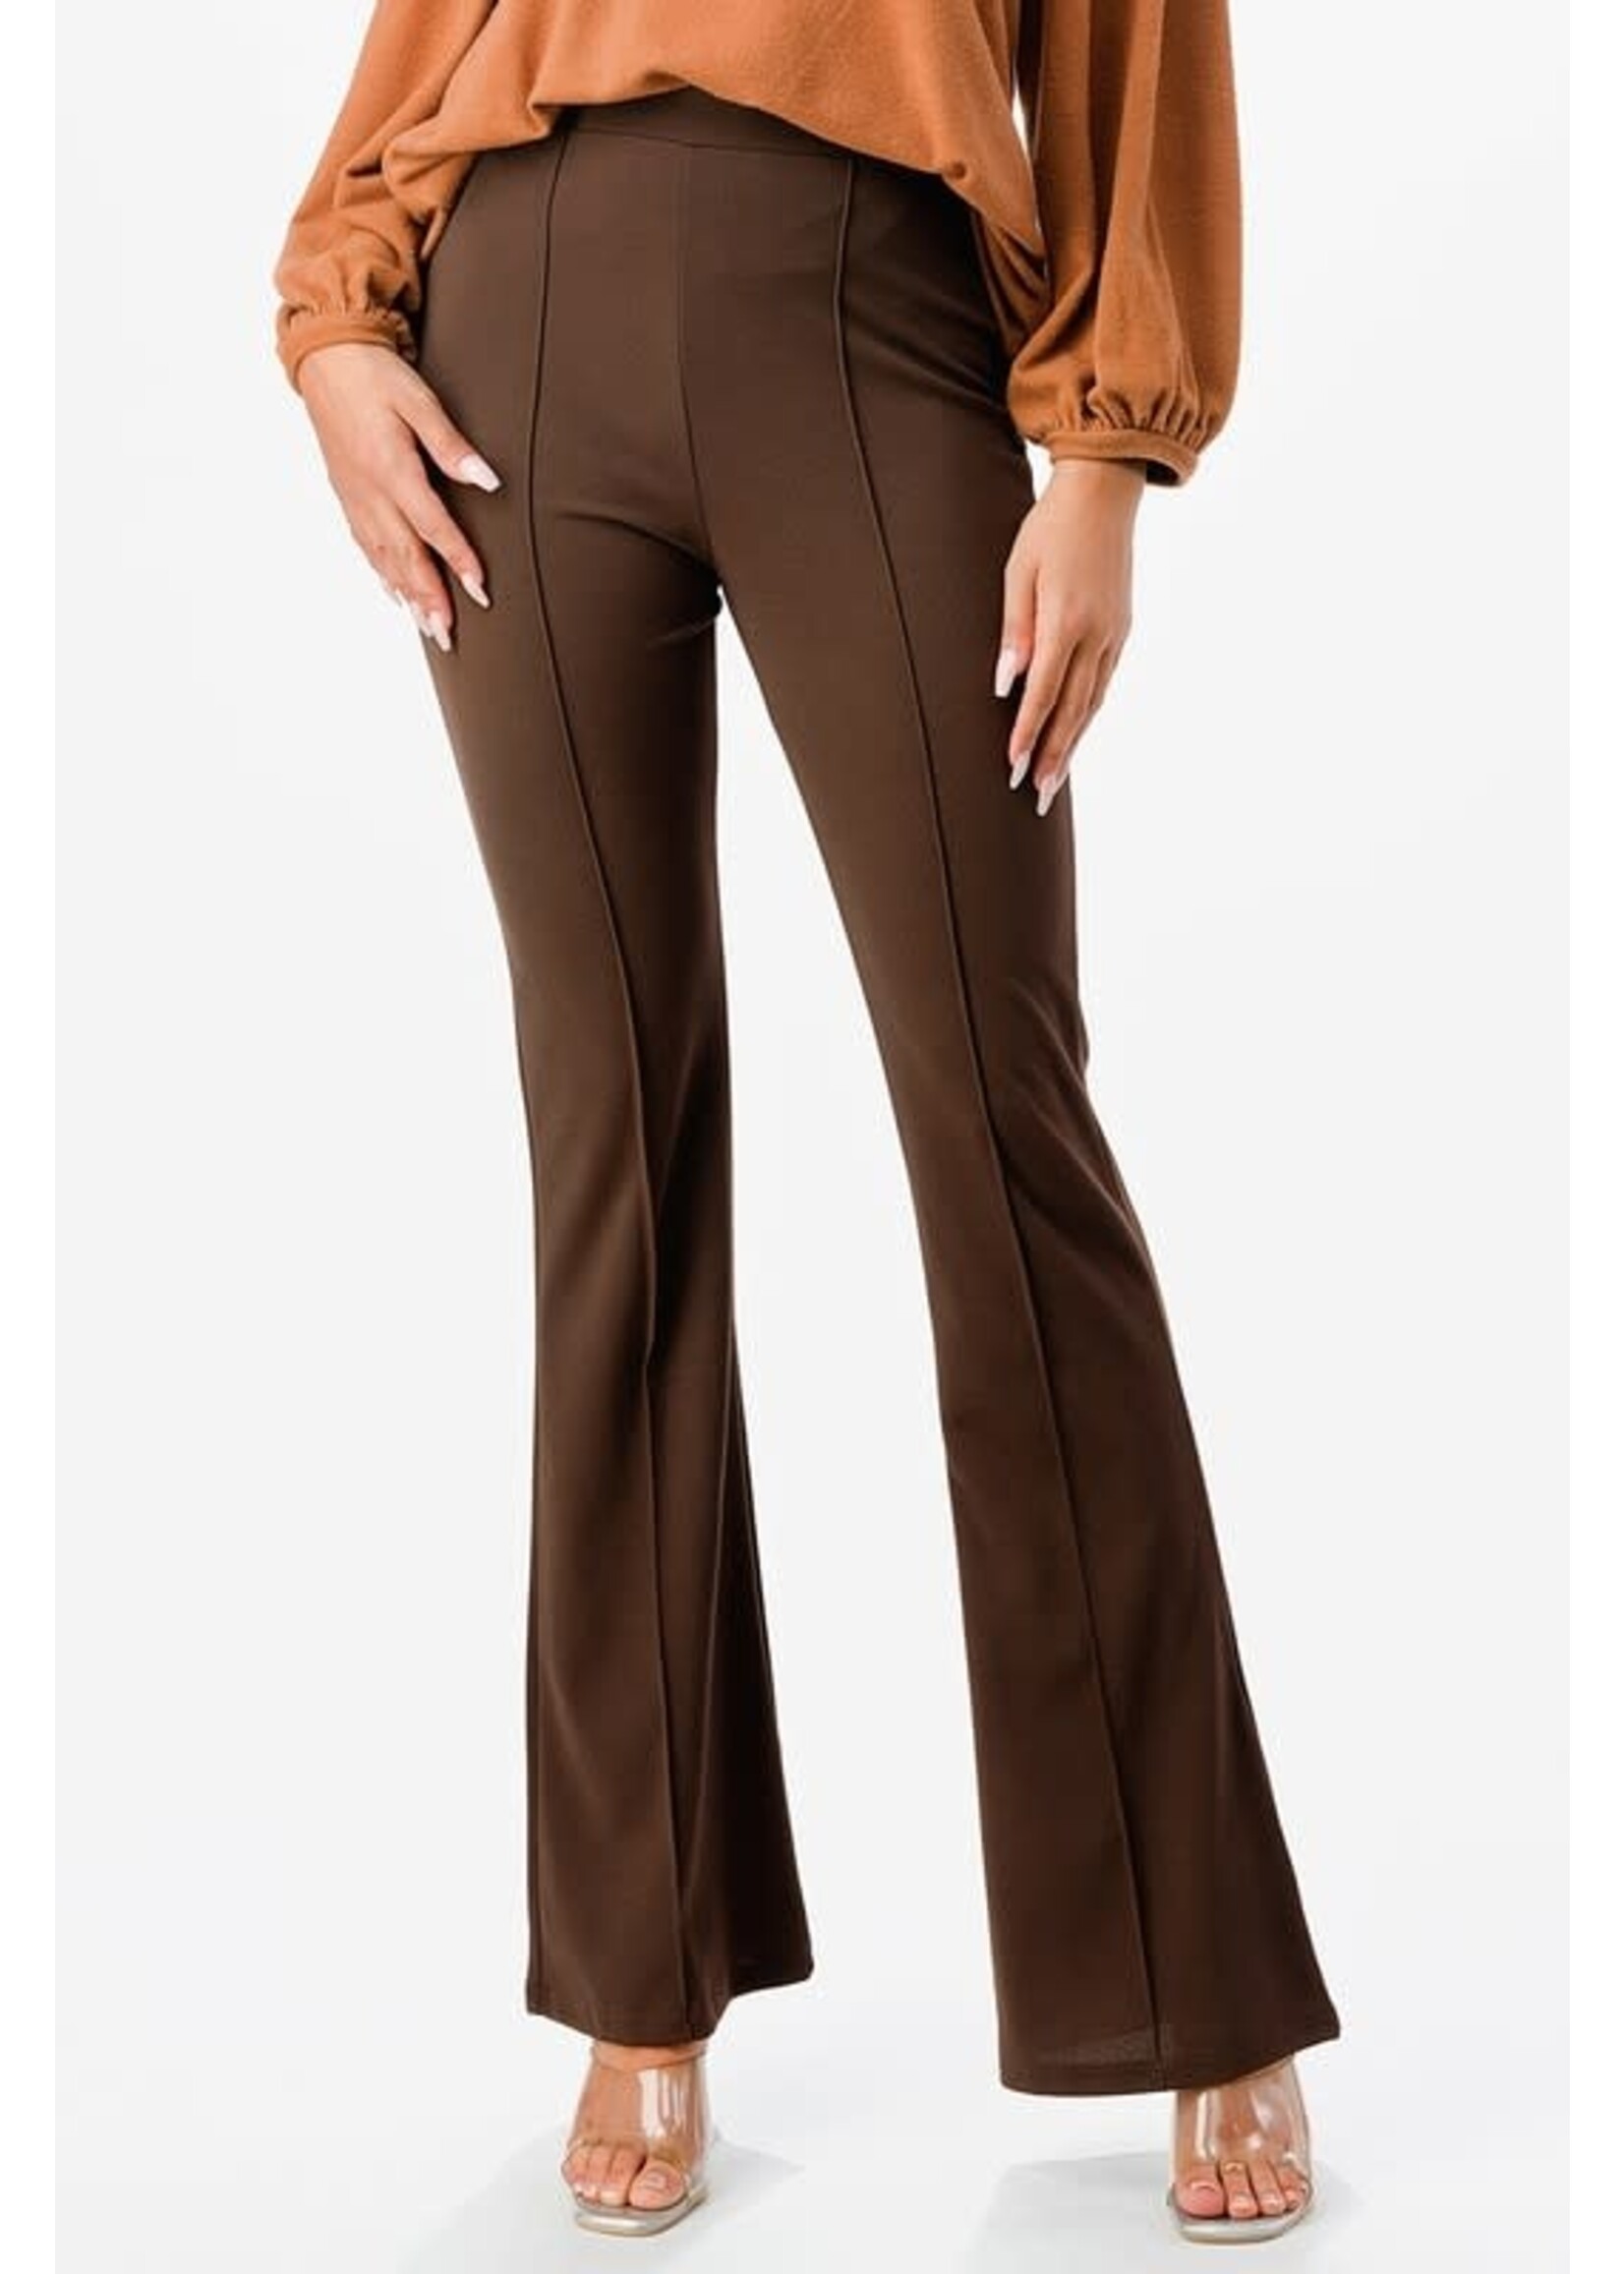 Stylive Pintuck Flare Pants